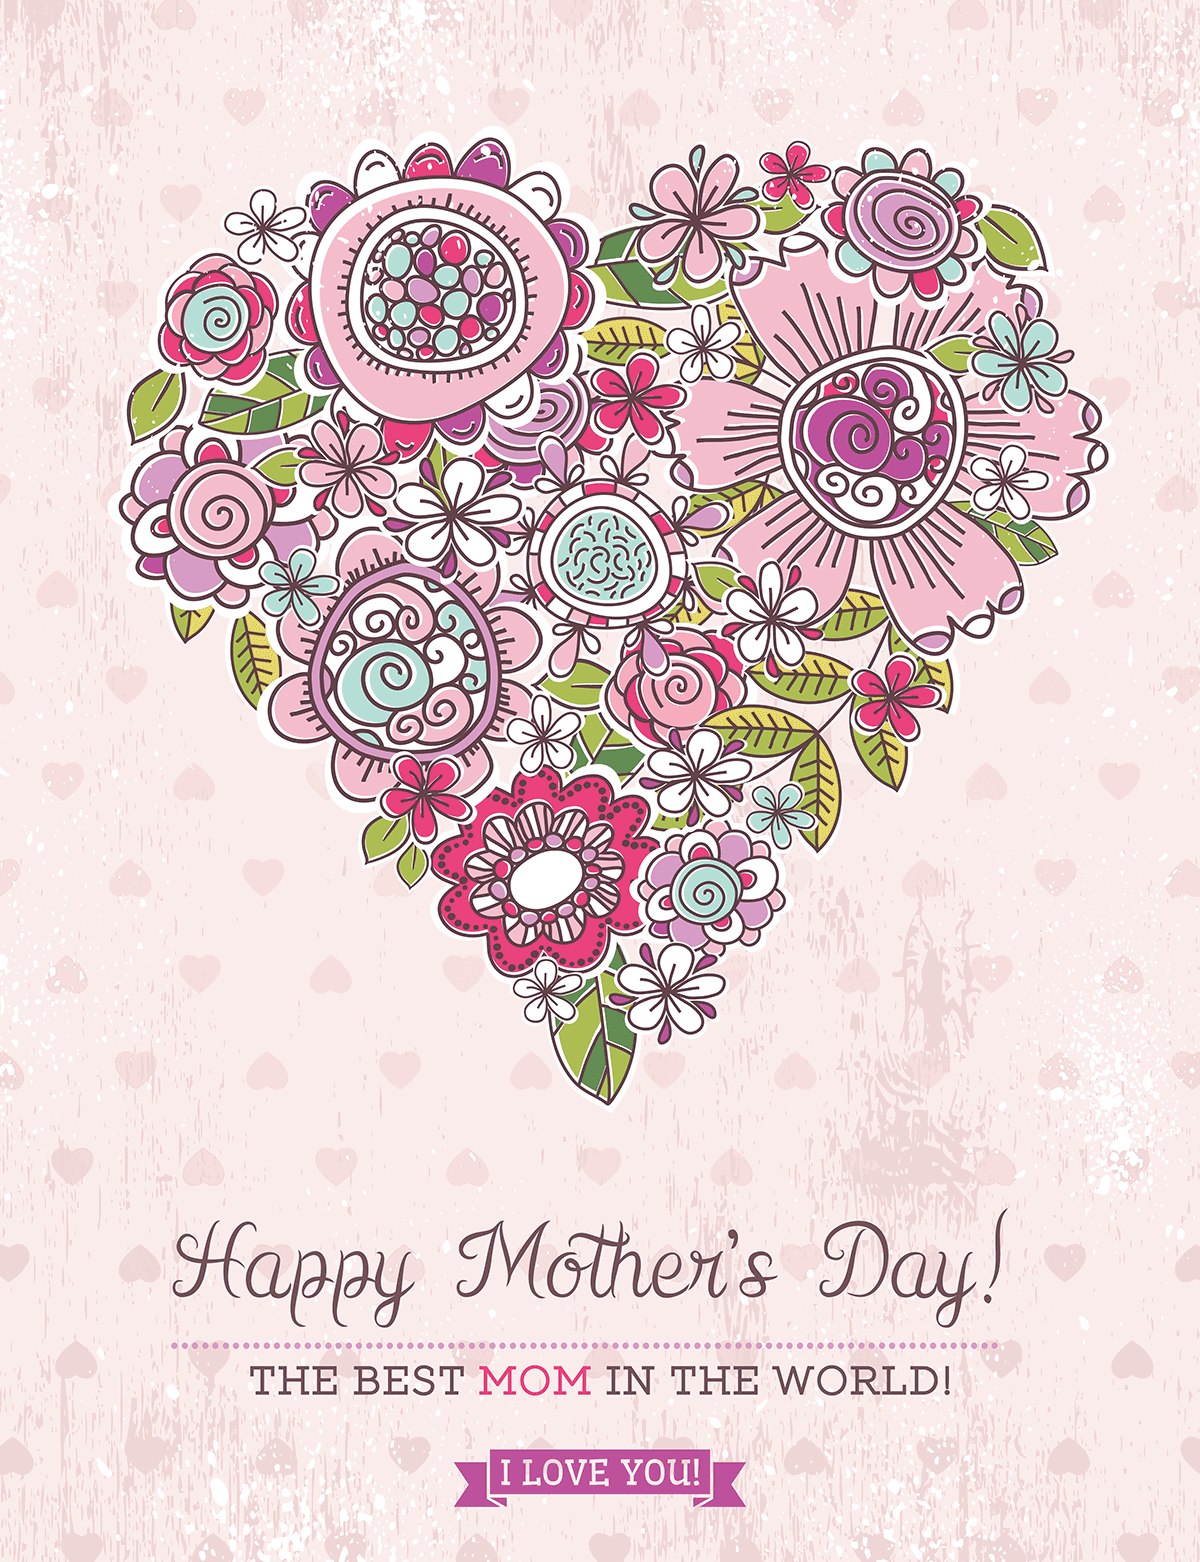 A pink Mother's Day card.